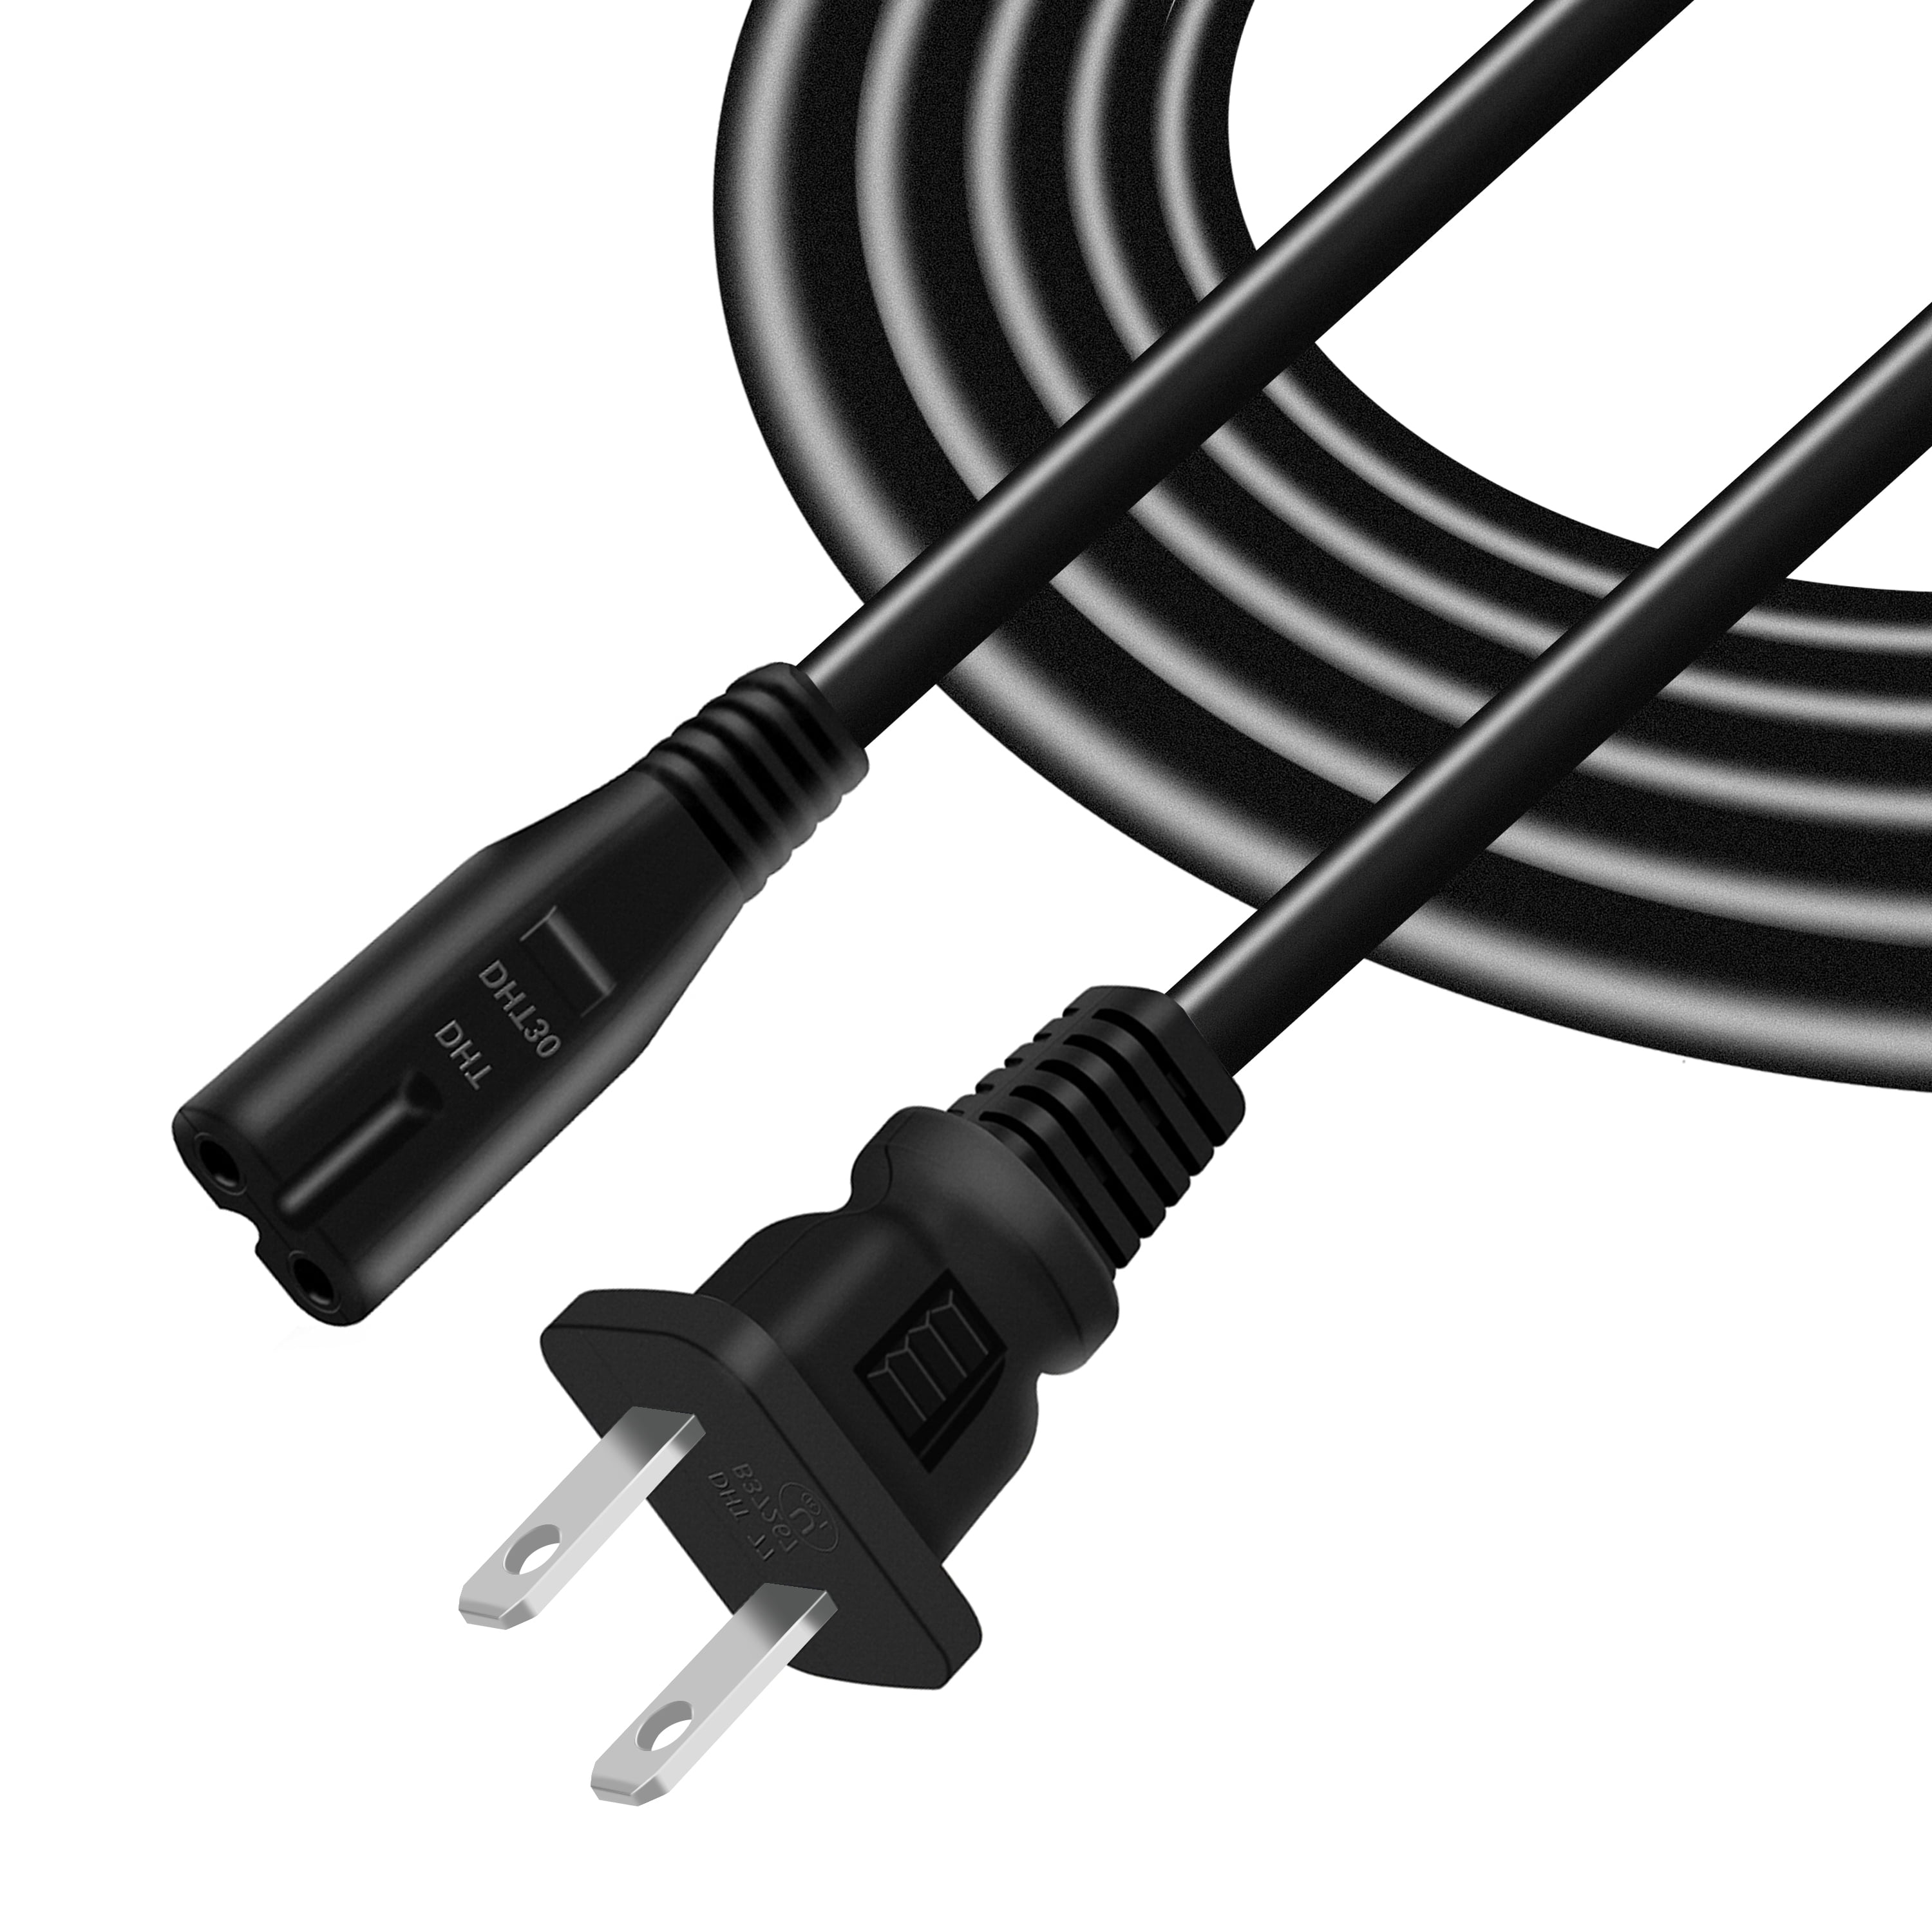 ABLEGRID 6ft UL AC Cable for Igloo Beverage Electric Mini Fridge Refrigerator Power Cord 